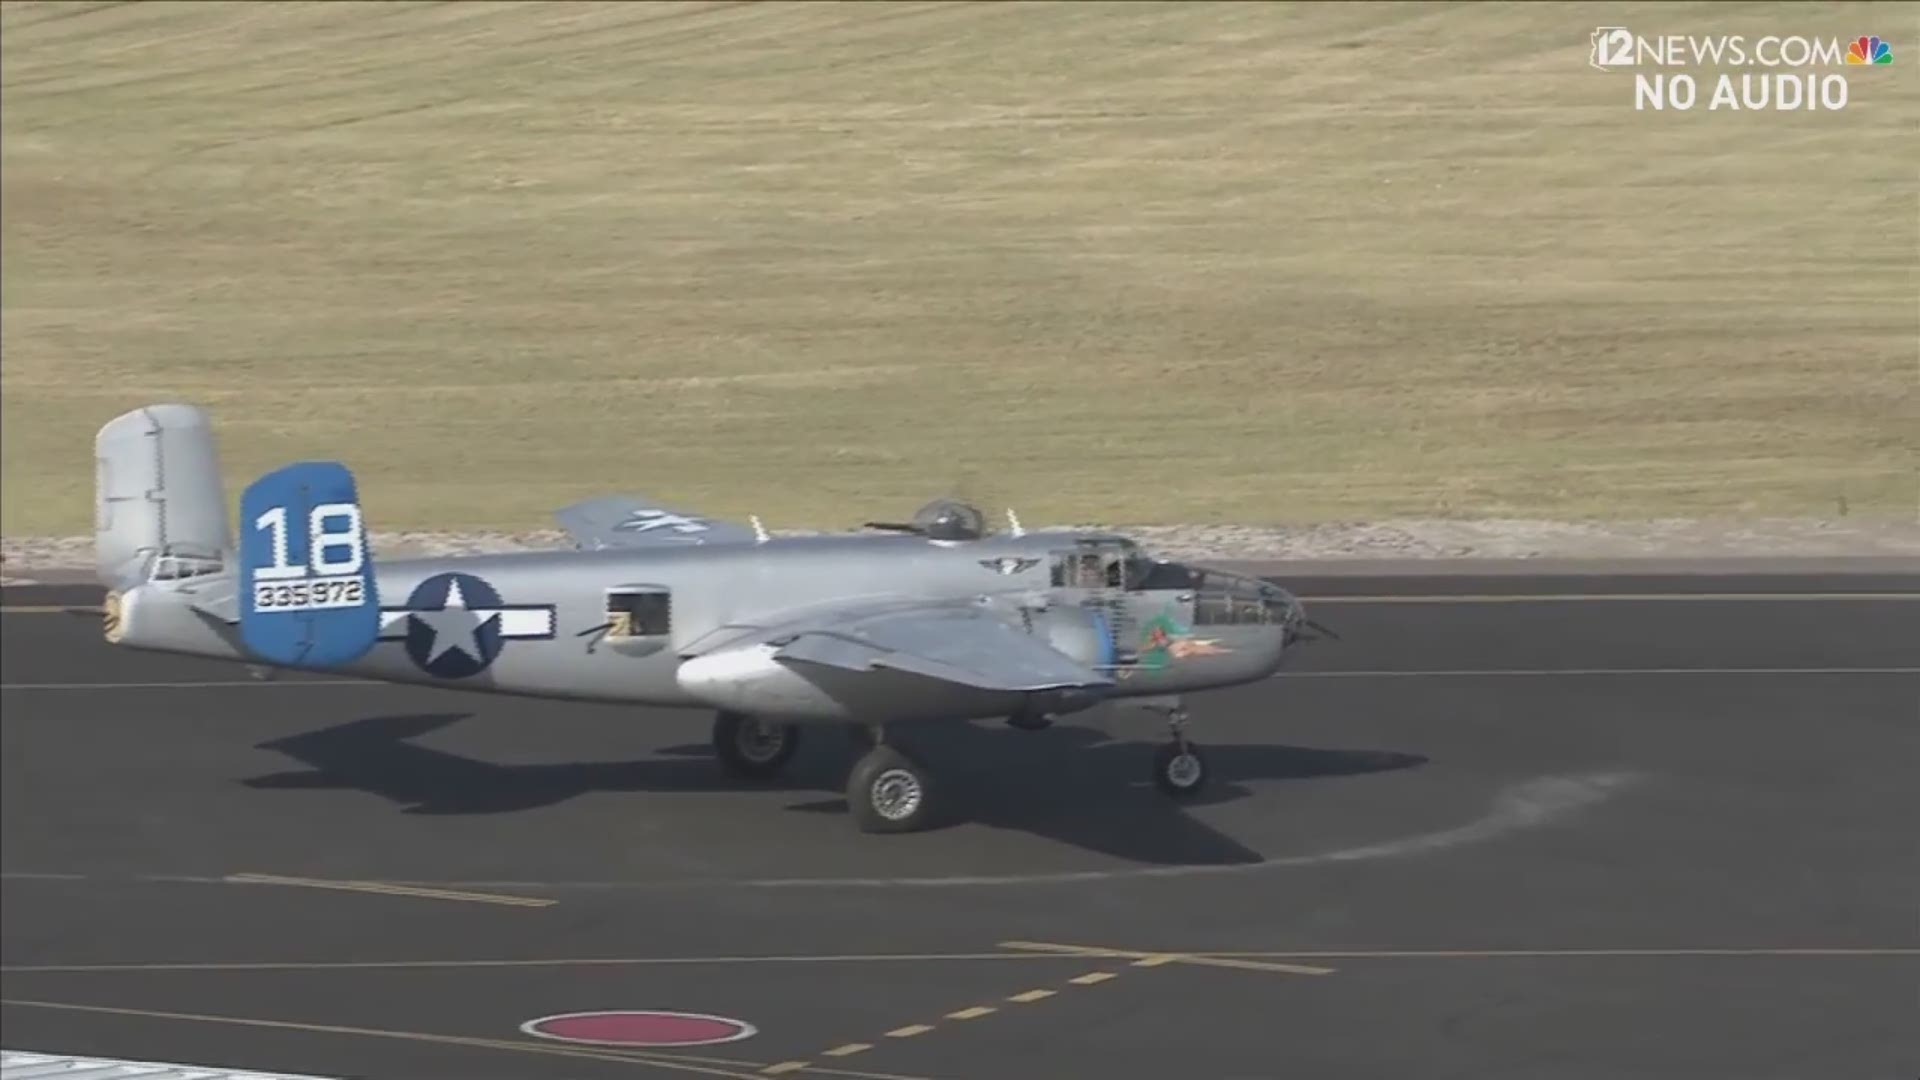 A historic warbird flyover is being held over the Phoenix area to commemorate the 75th anniversary of Victory in Europe Day. Helicopter Sky 12 followed the planes.